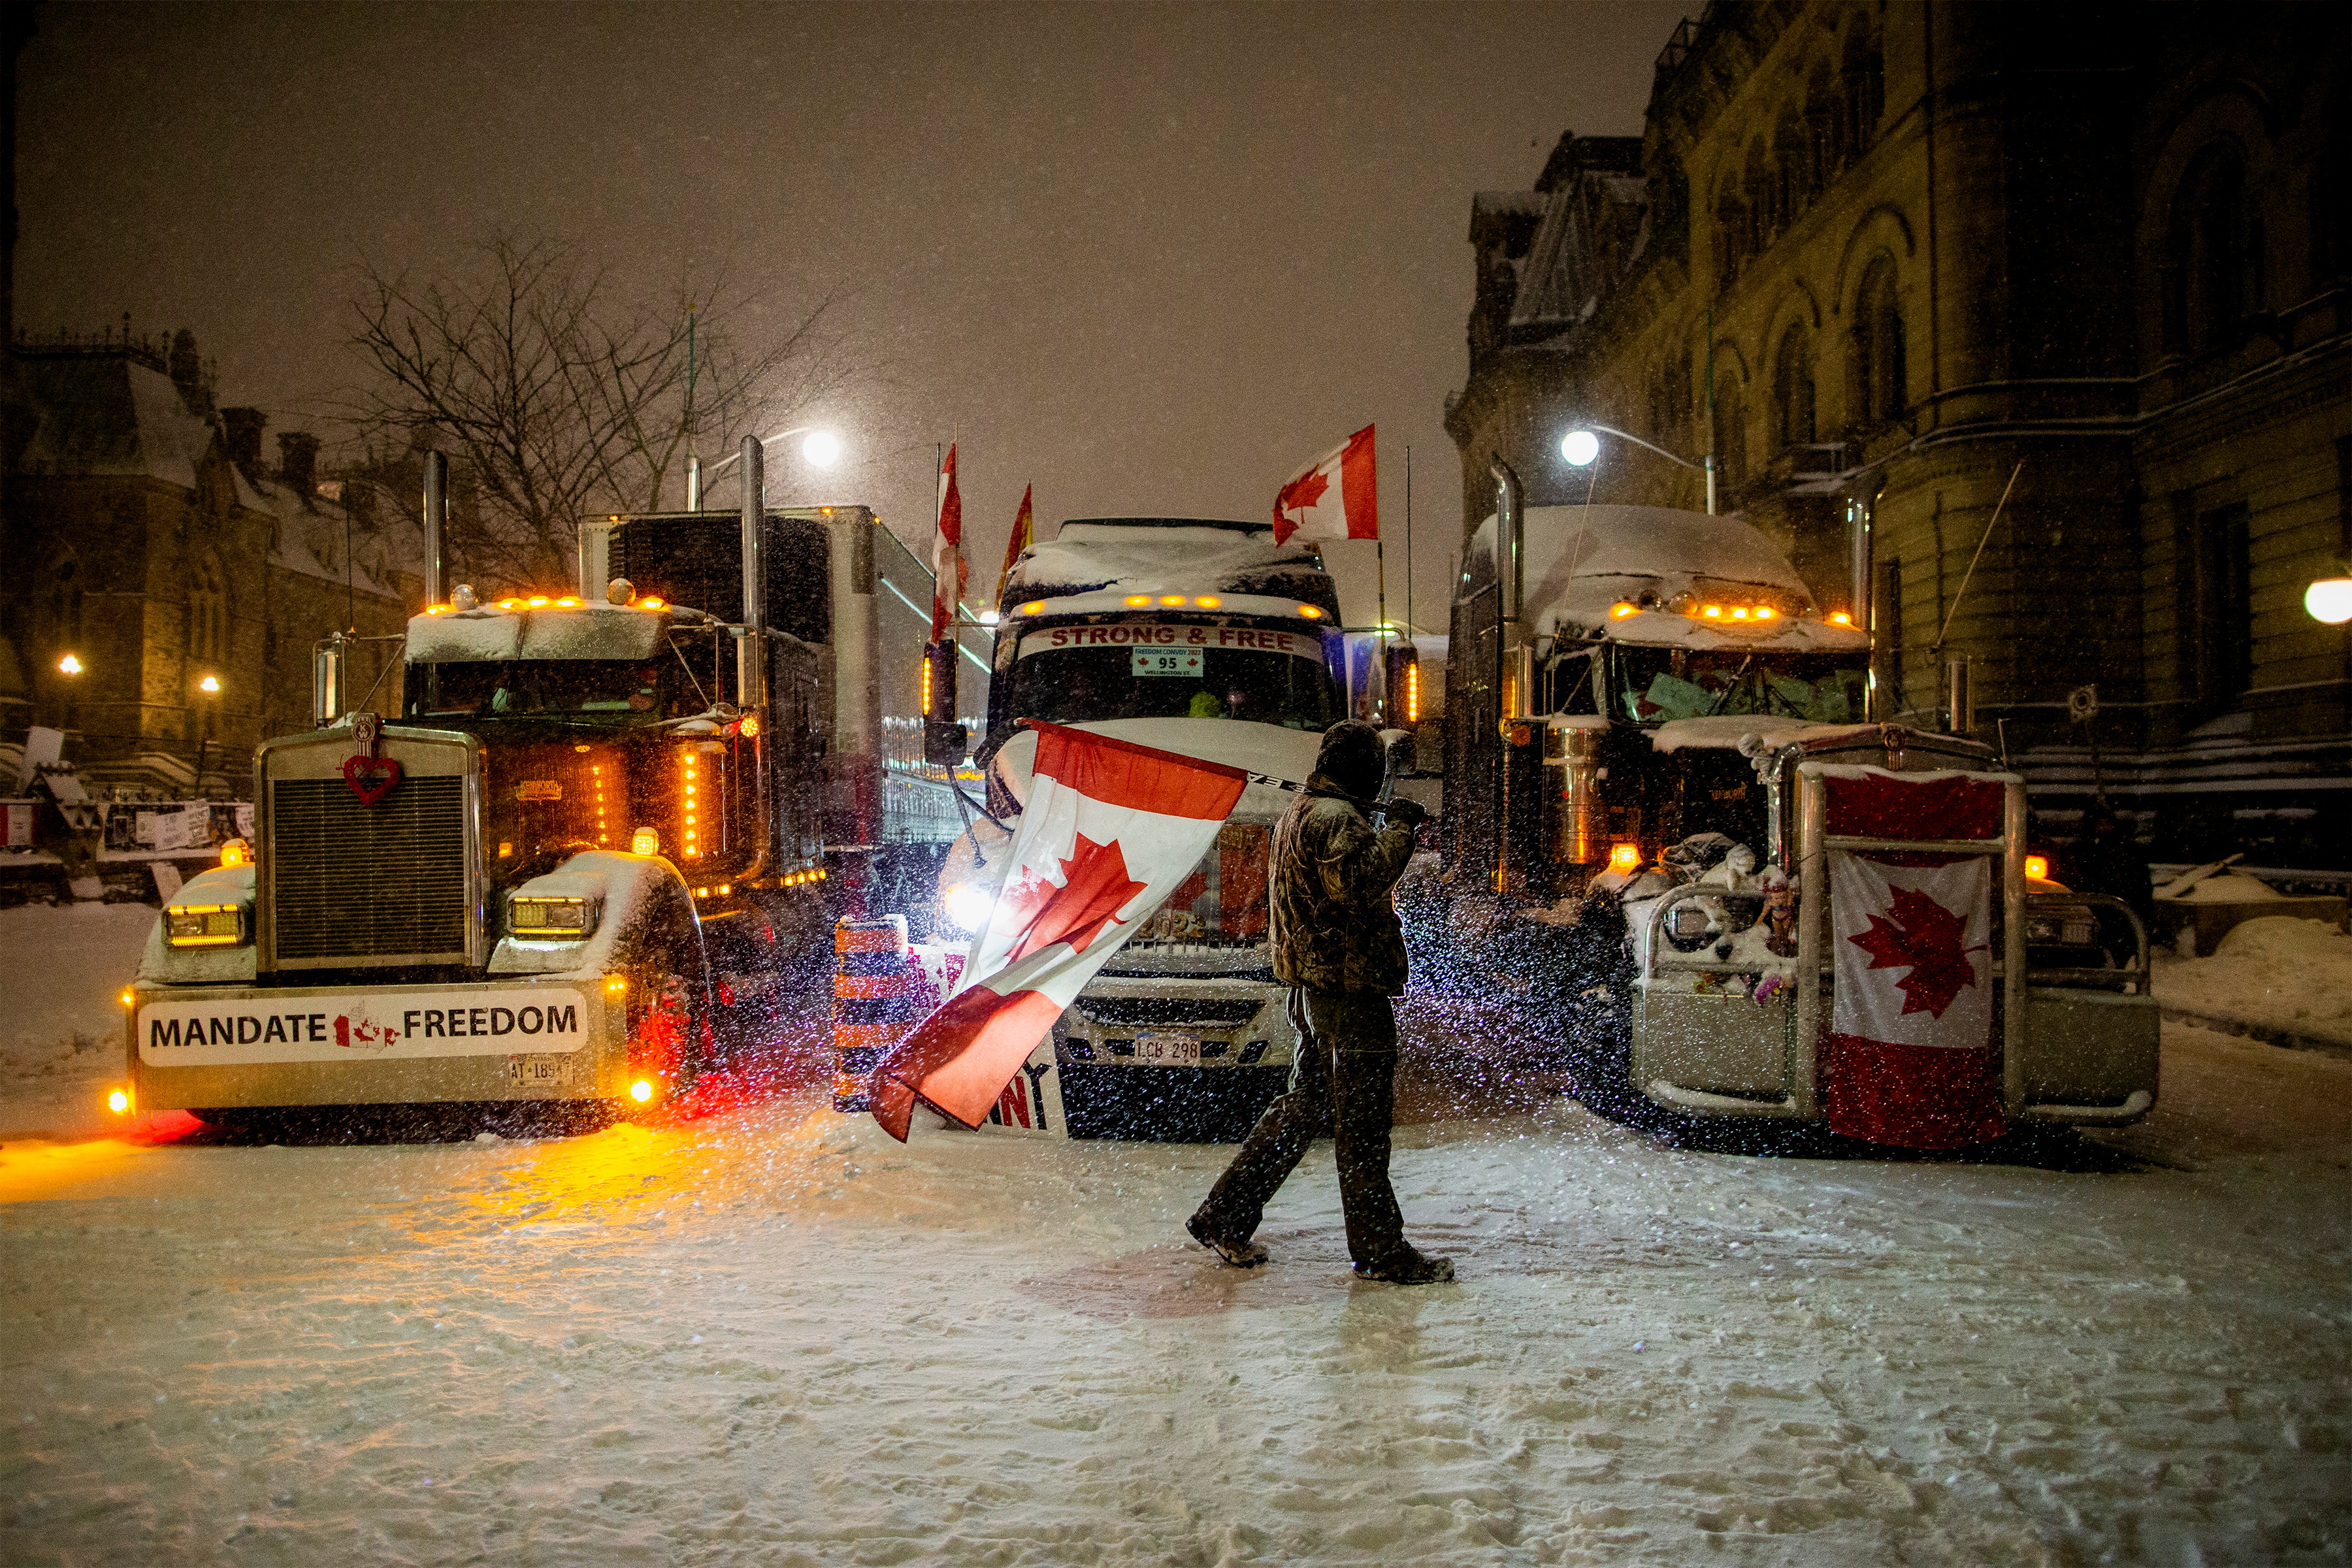 A man walks with a Canada flag in front of a truck as protests against coronavirus disease (COVID-19) vaccine mandates continue, along Wellington street near the Parliament of Canada, in Ottawa, Ontario, Canada, February 17, 2022. REUTERS/Carlos Osorio